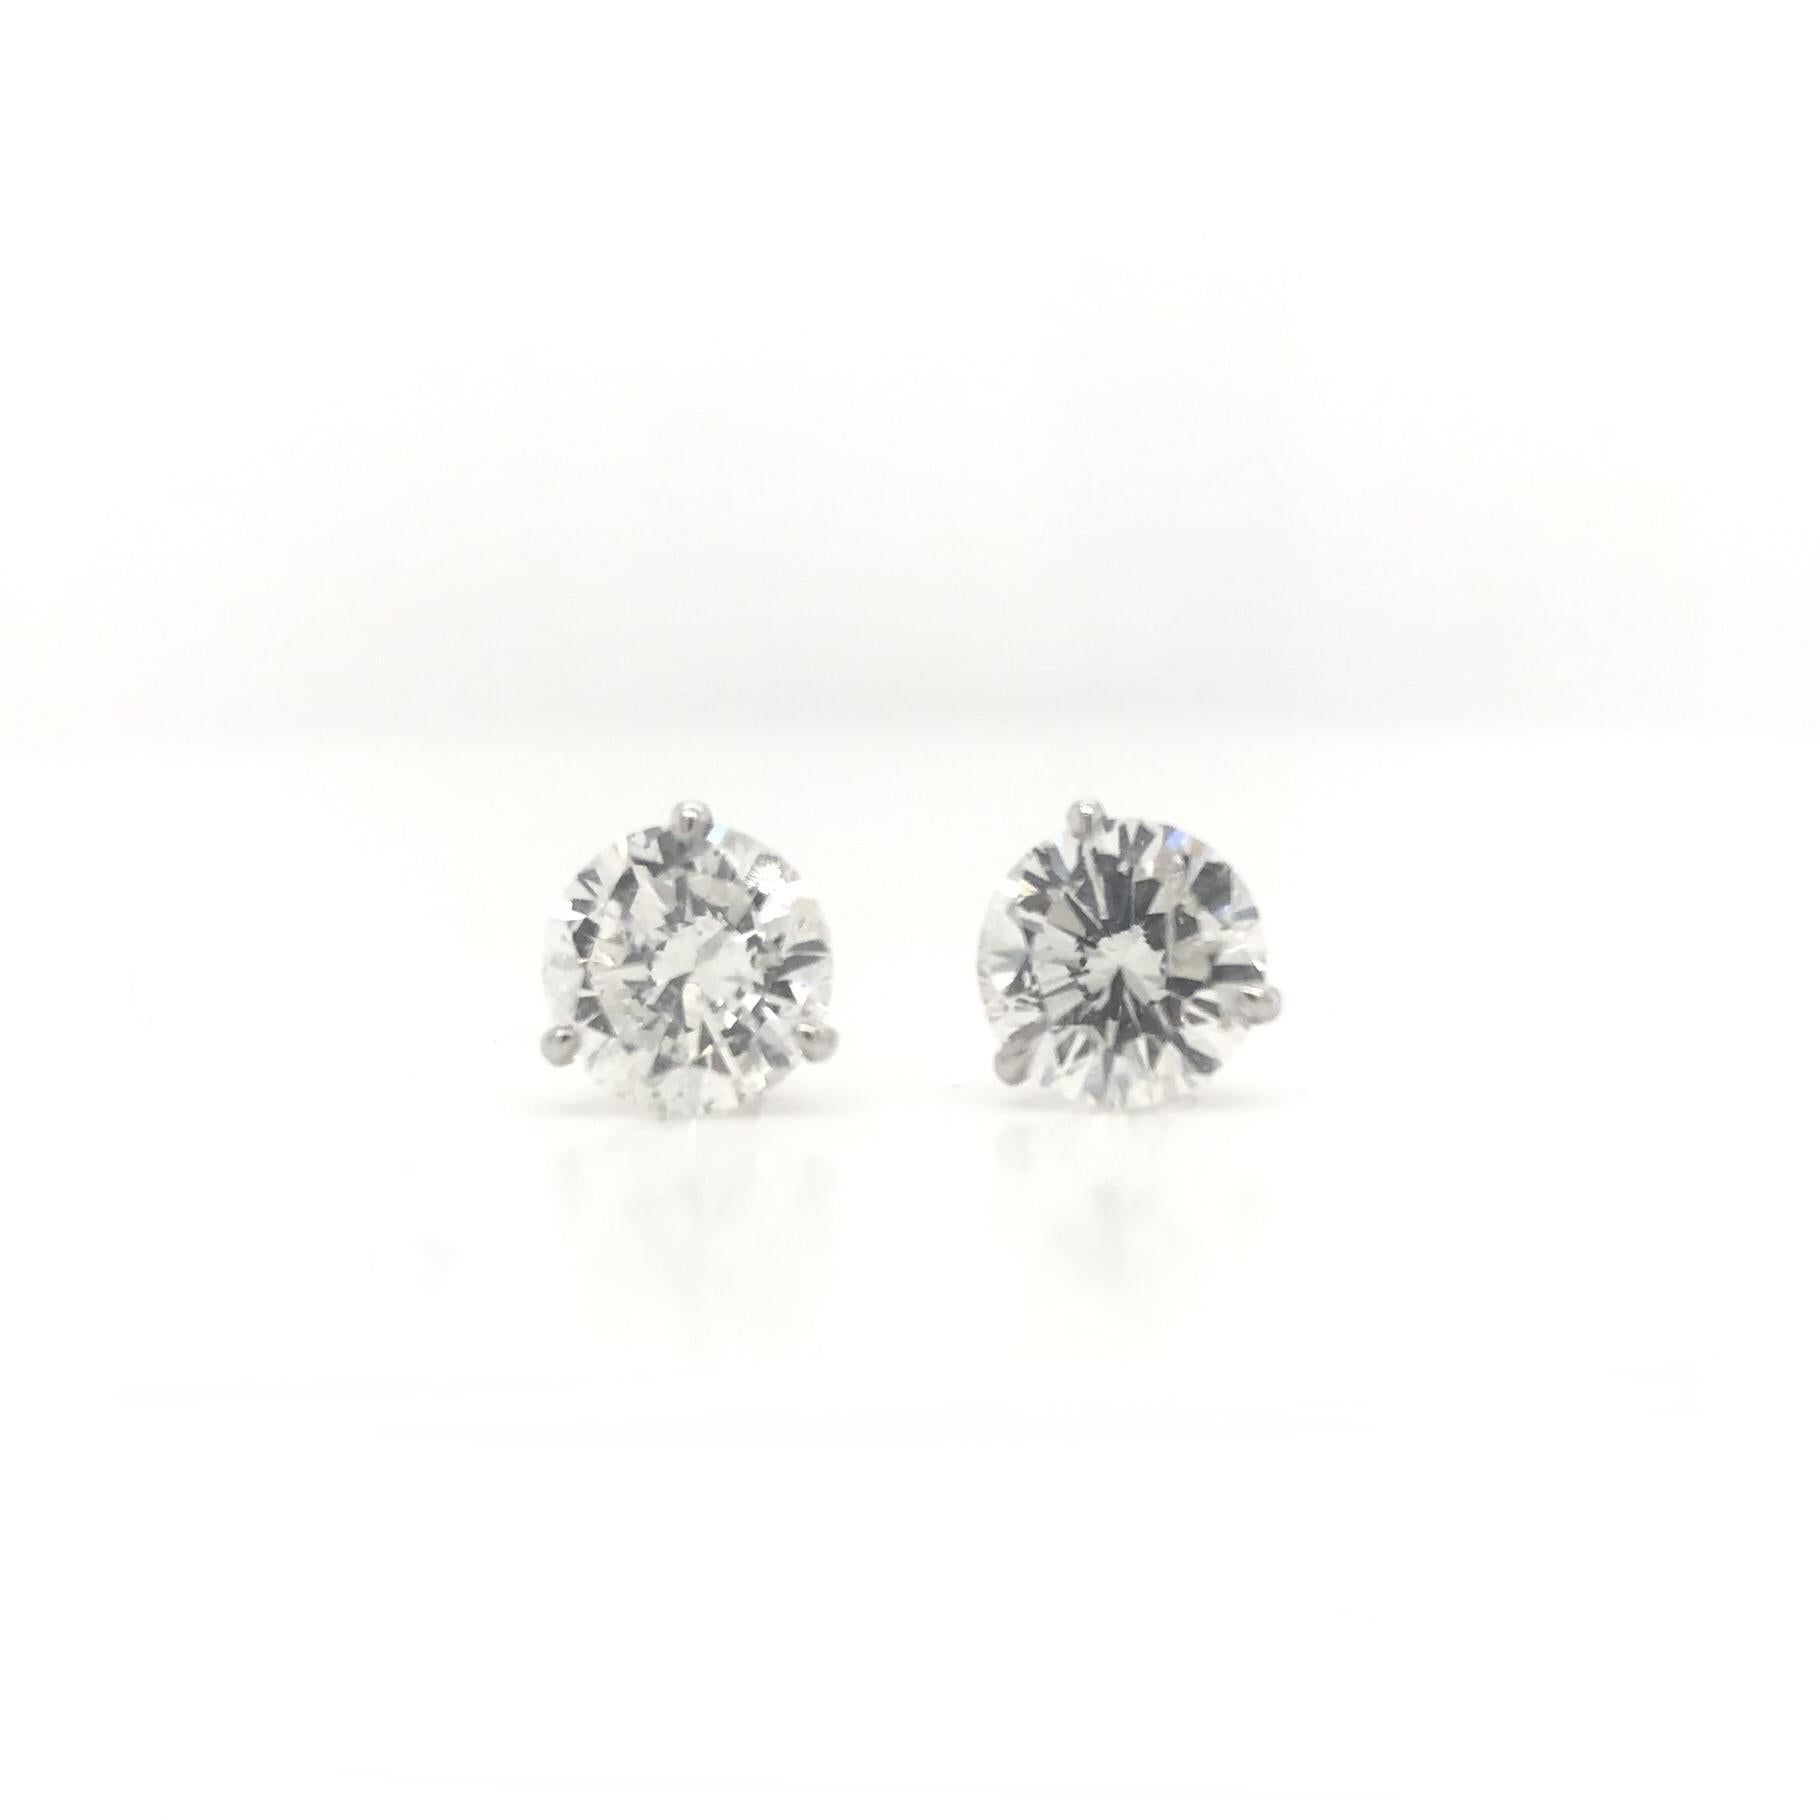 These contemporary diamond stud earrings feature 14K white gold “Martini” style settings. Each setting has three prongs arranged in a very simple design; playfully resembling a martini glass. The diamonds have a total combined diamond weight of